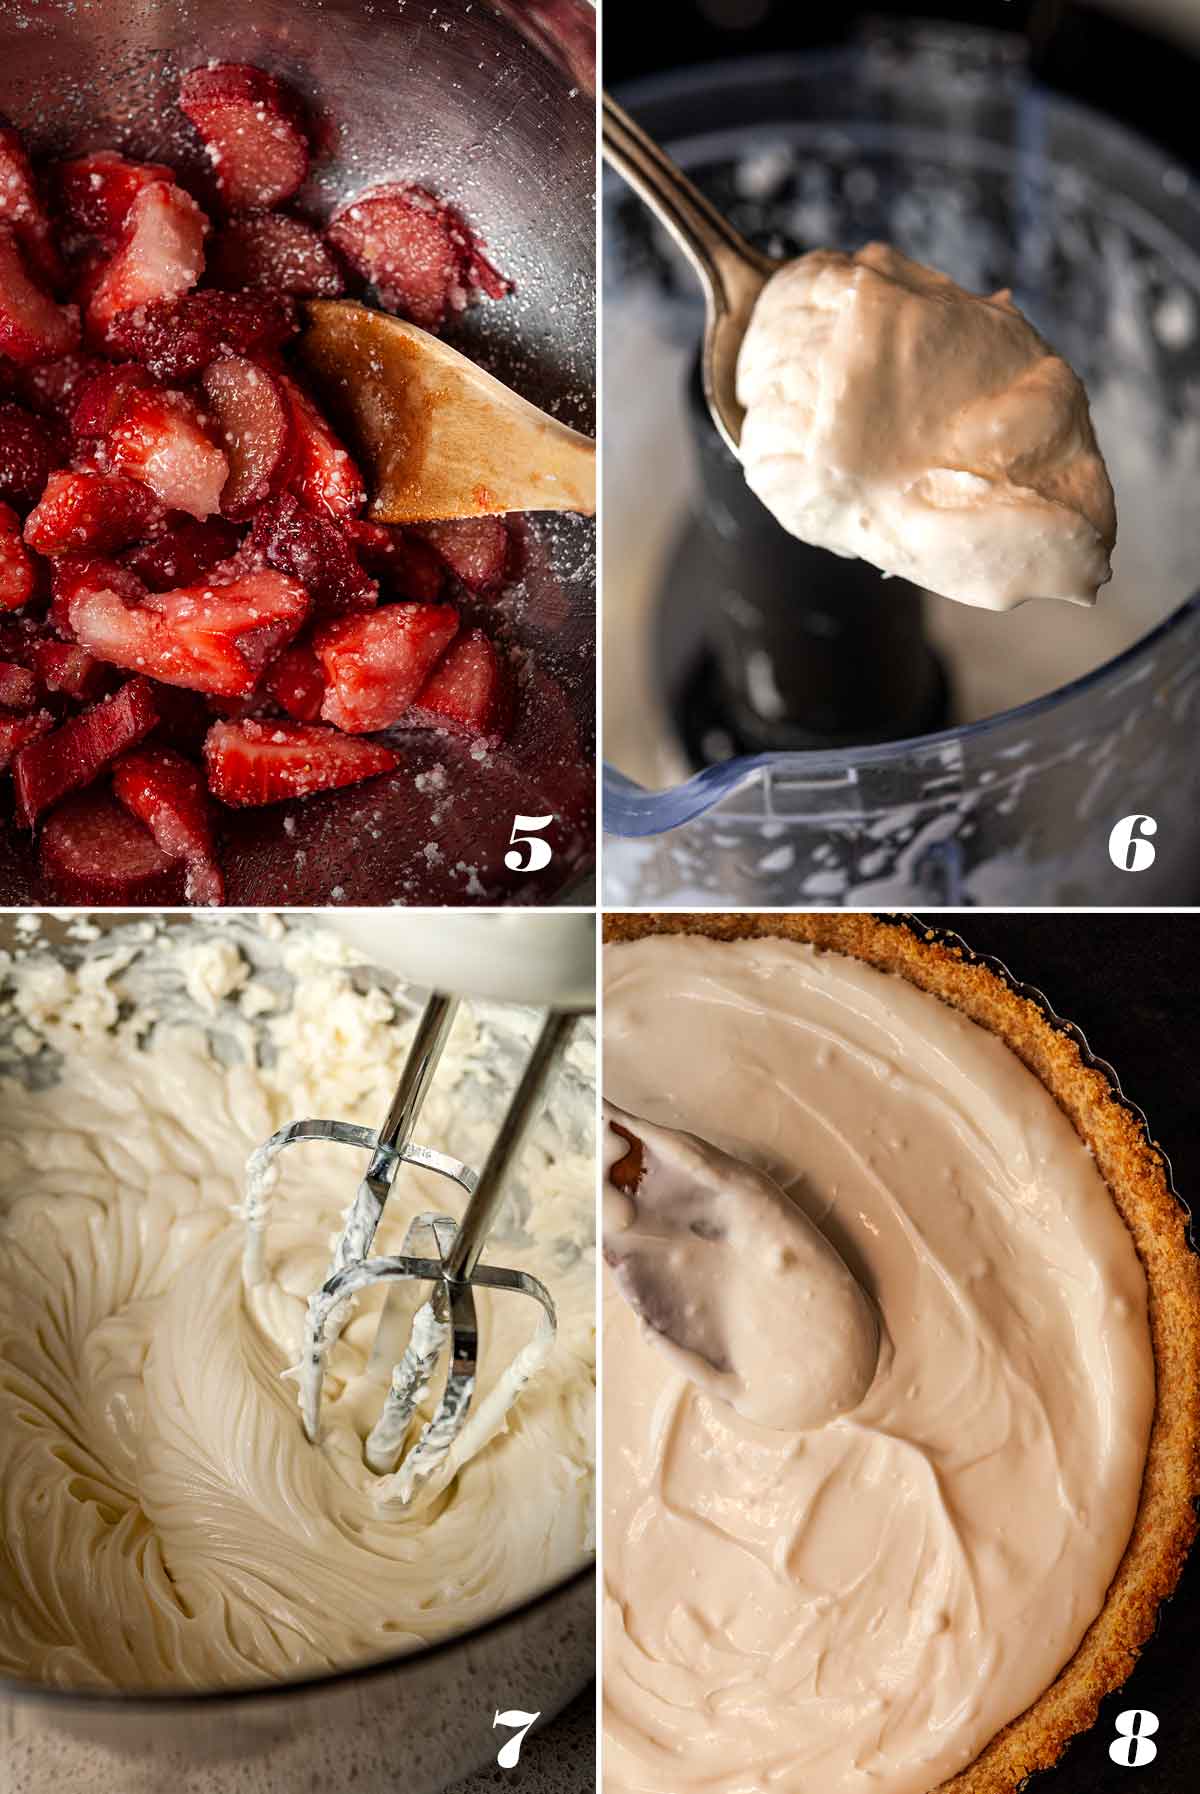 A collage of 4 numbered images showing how to make cheesecake and mix strawberries.